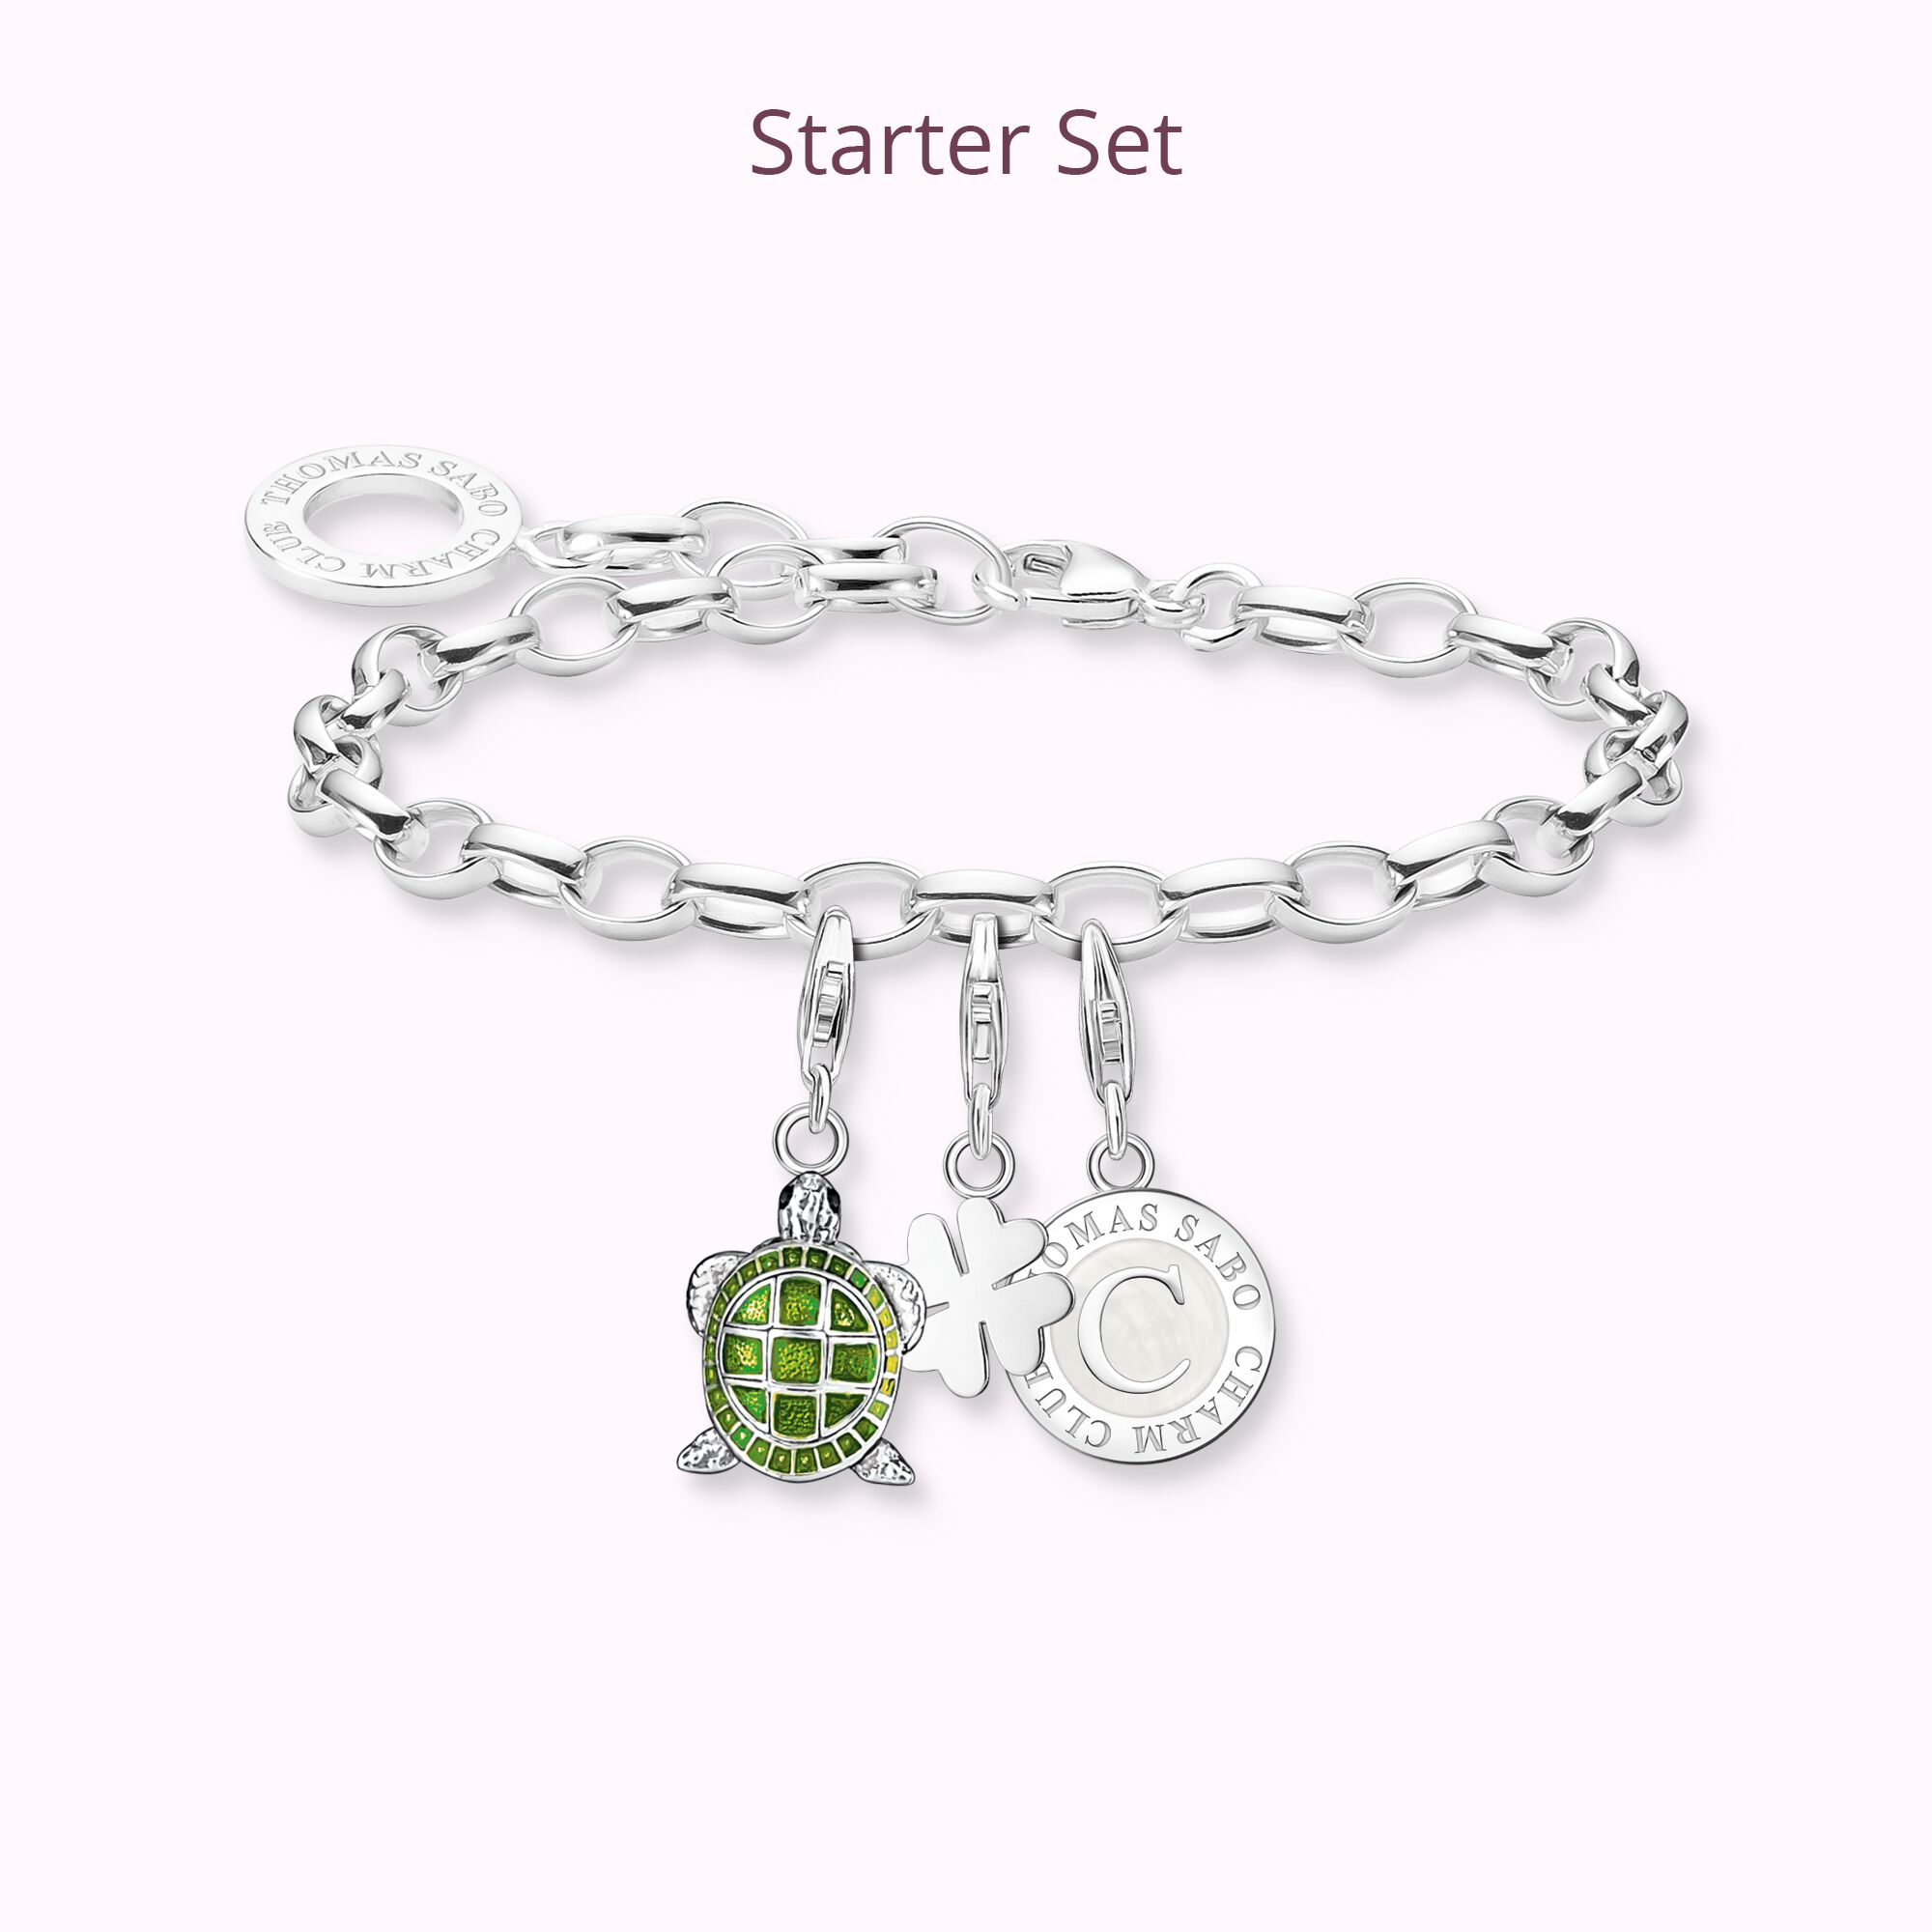 Silver CHARMISTA starter set lucky turtle from the Charm Club collection in the THOMAS SABO online store